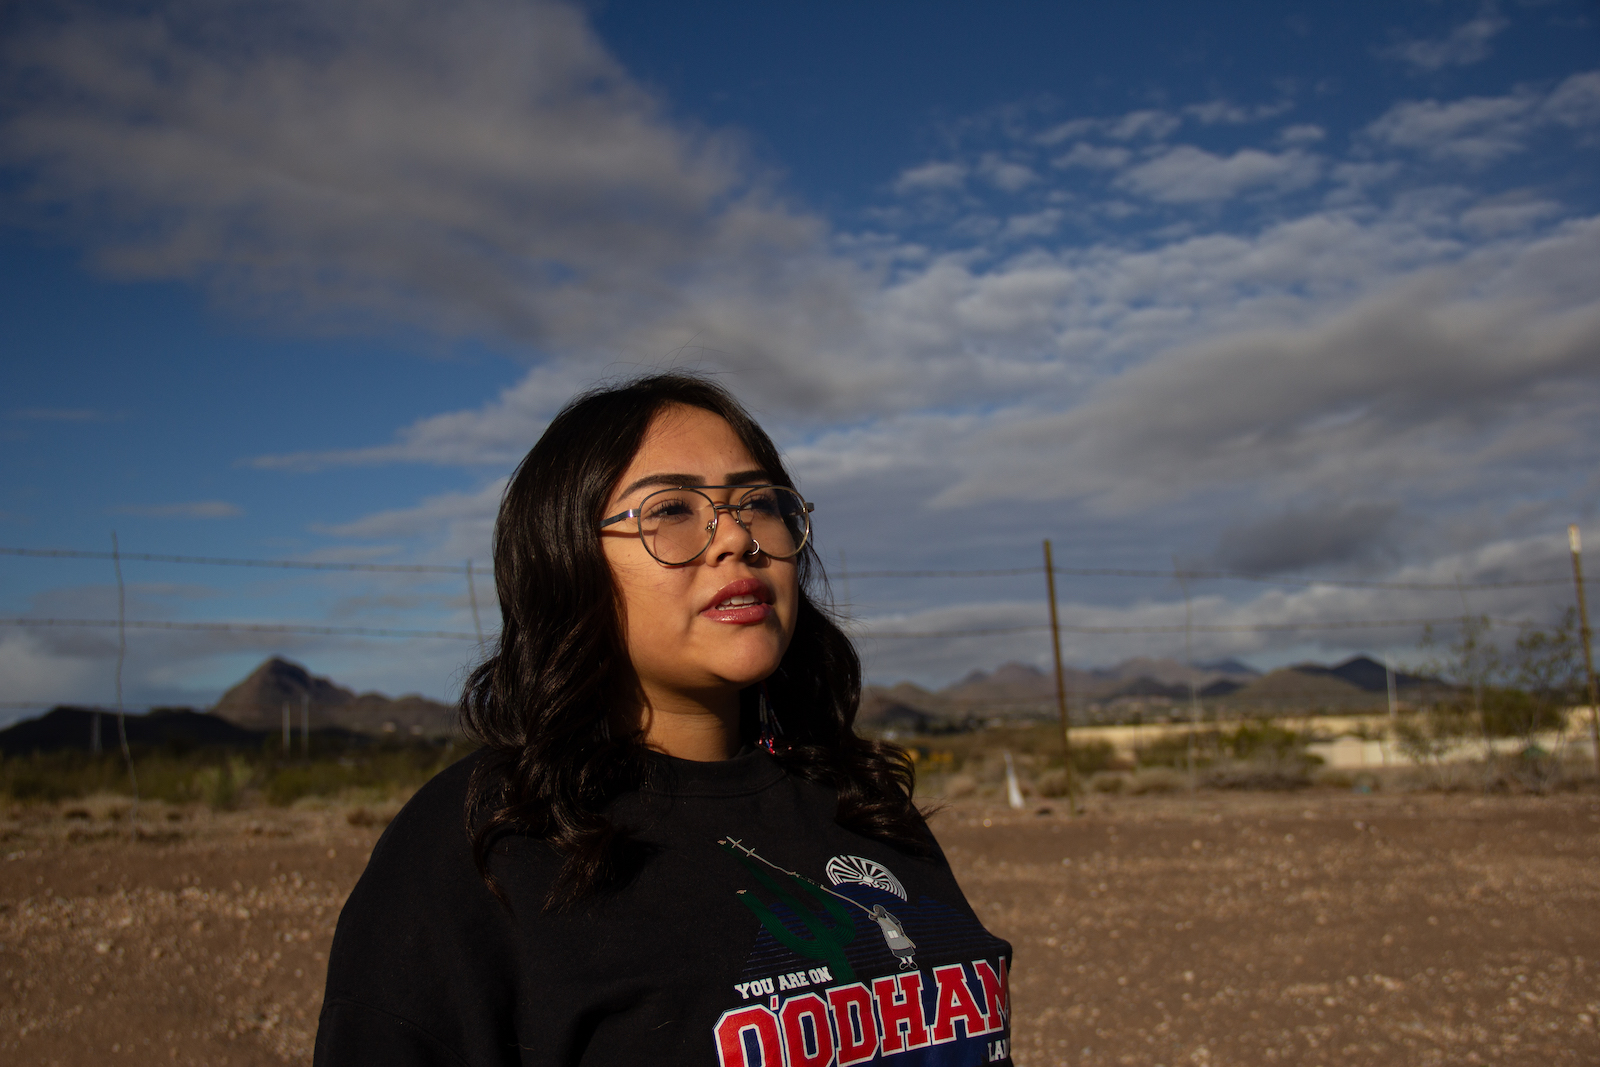 a woman looks to the right while standing in a desert community